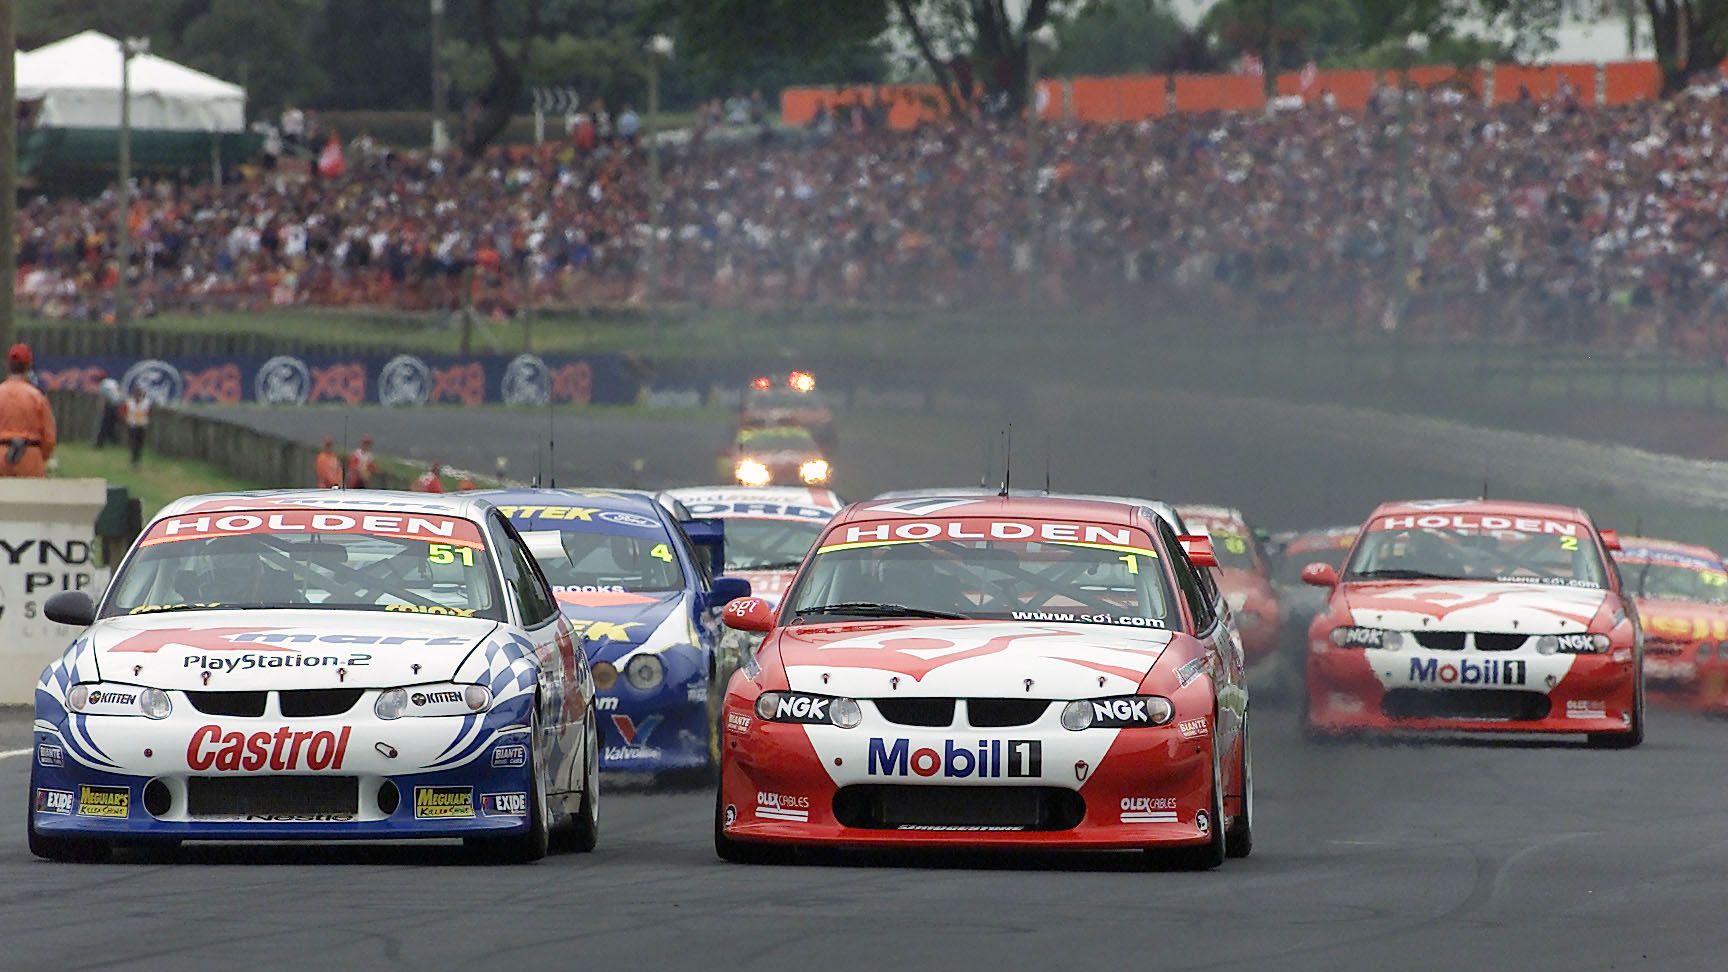 Greg Murphy (No.51) in his Holden Commodore VX races down the straight next to championship winner Mark Skaife (No.1) at Pukekohe Park.